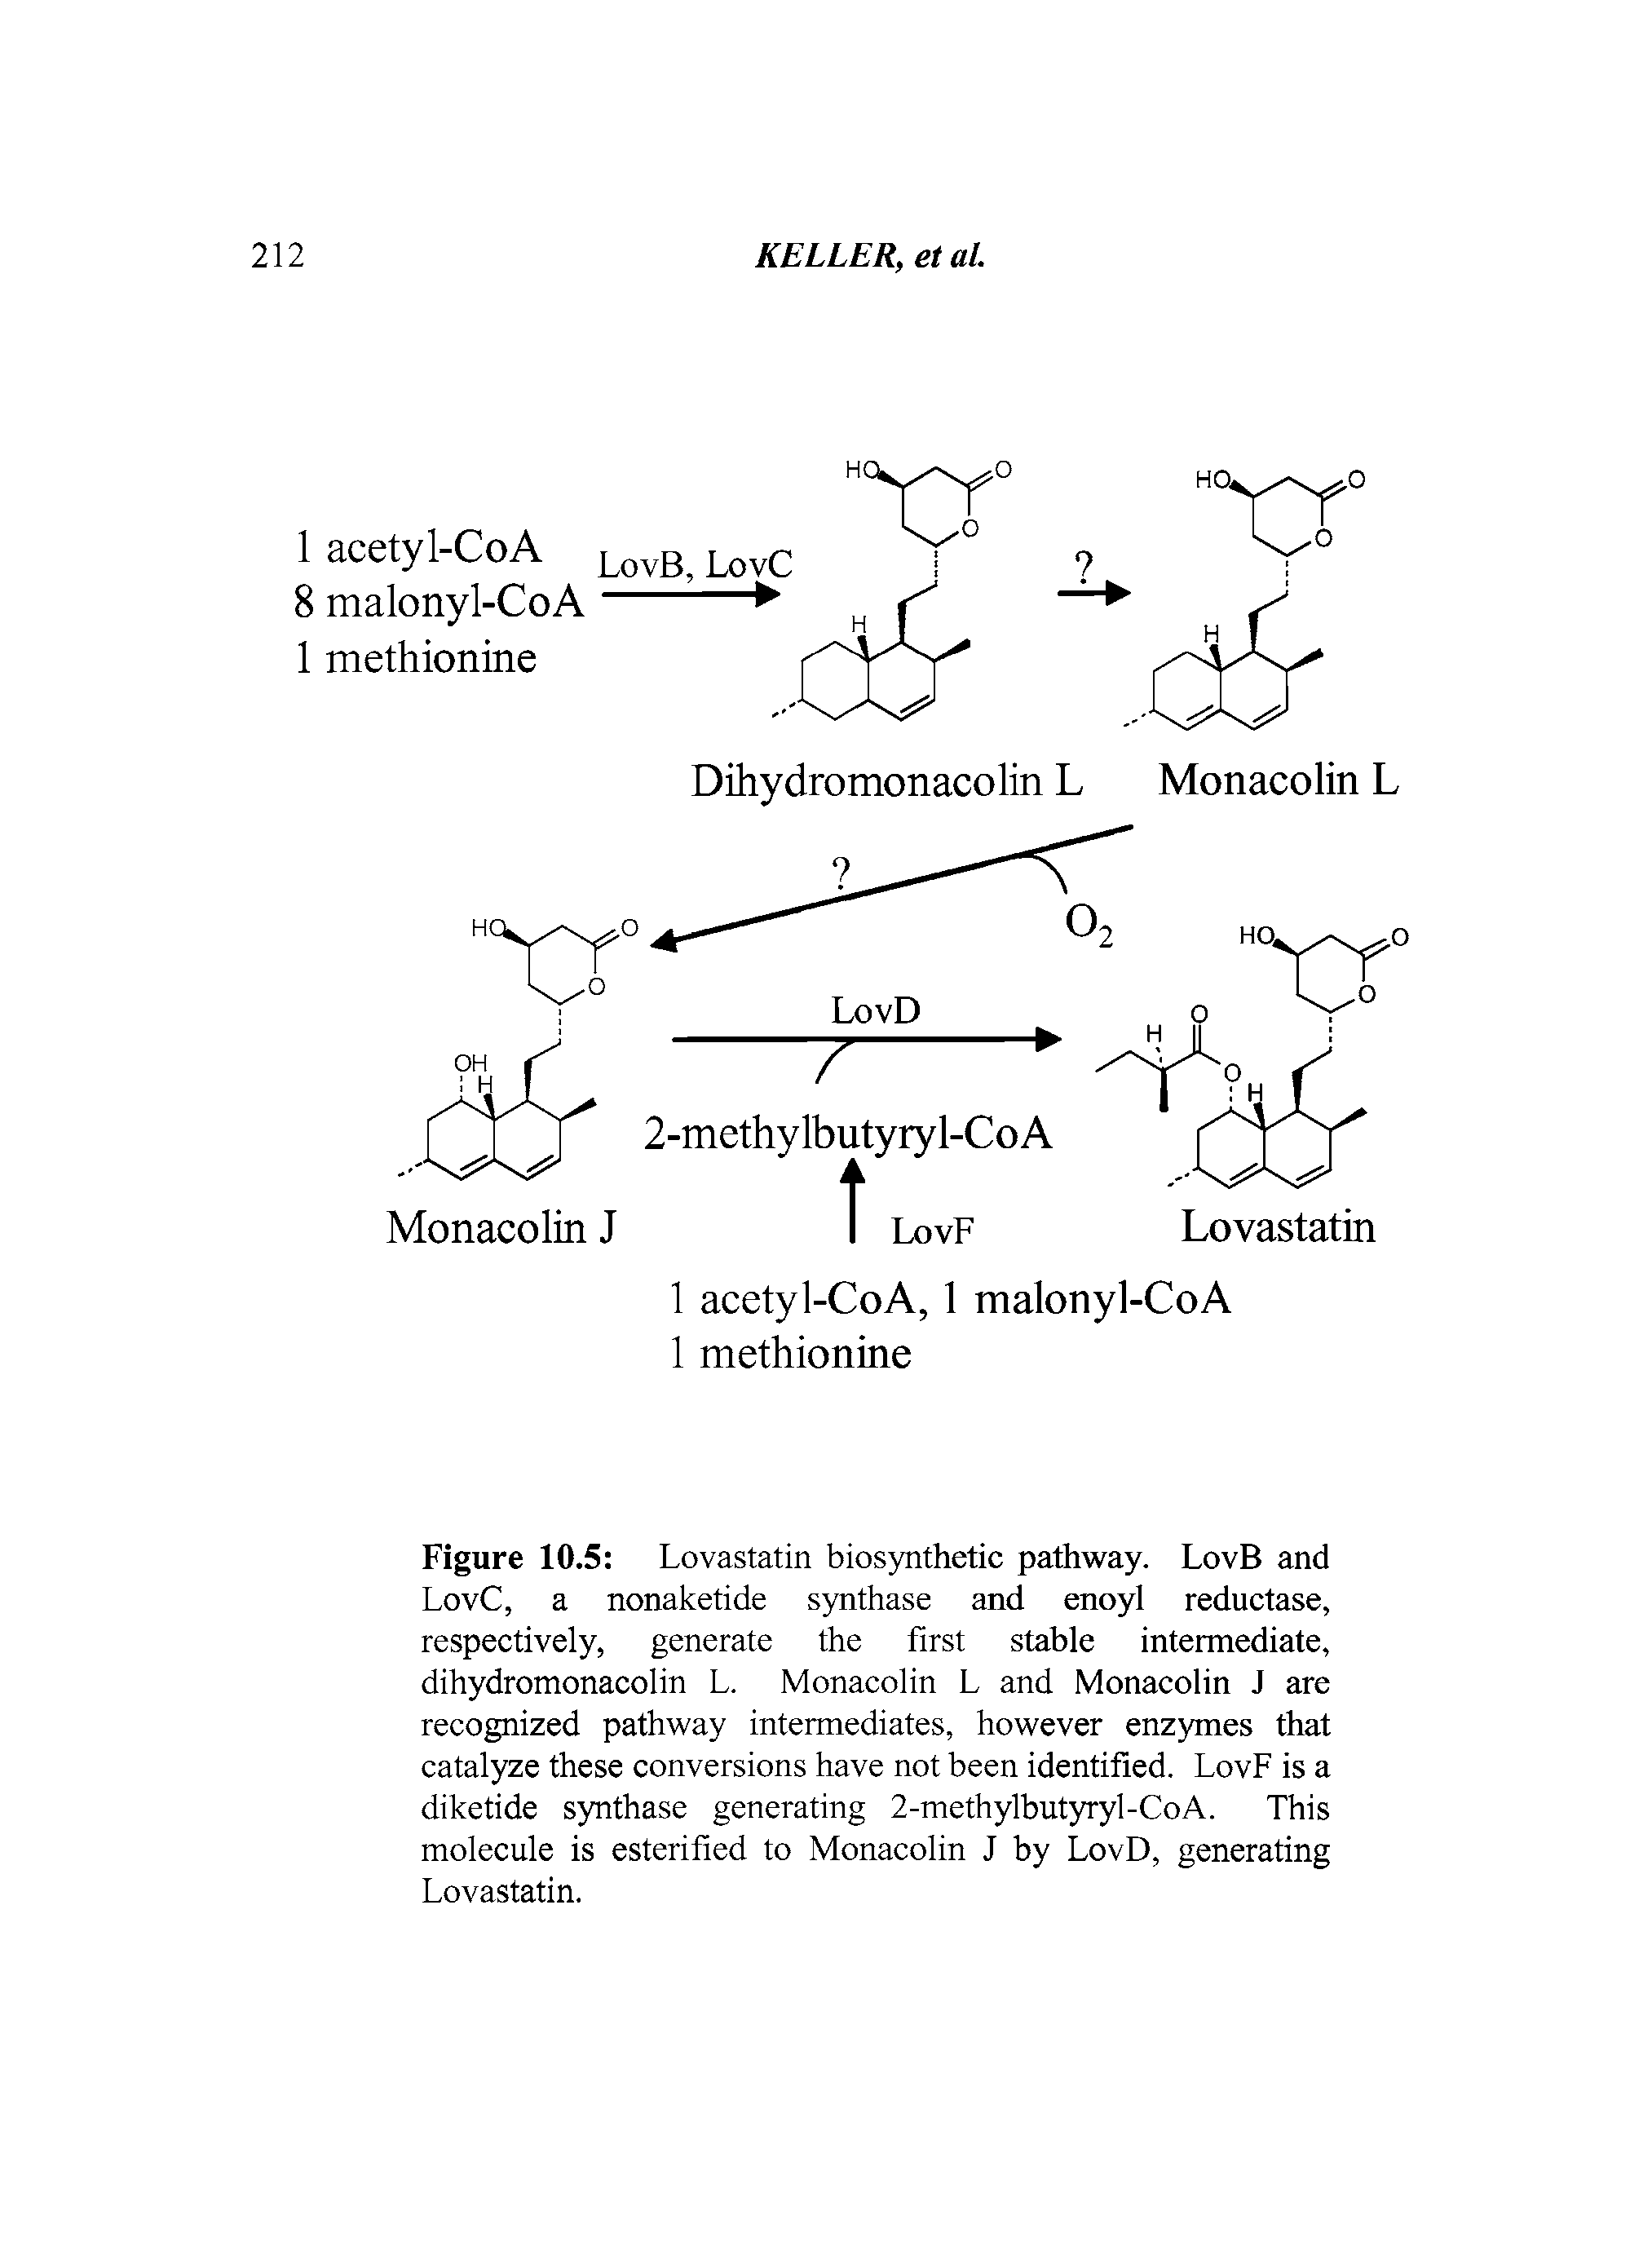 Figure 10.5 Lovastatin biosynthetic pathway. LovB and LovC, a nonaketide synthase and enoyl reductase, respectively, generate the first stable intermediate, dihydromonacolin L. Monacolin L and Monacolin J are recognized pathway intermediates, however enzymes that catalyze these conversions have not been identified. LovF is a diketide synthase generating 2-methylbutyryl-CoA. This molecule is esterified to Monacolin J by LovD, generating Lovastatin.